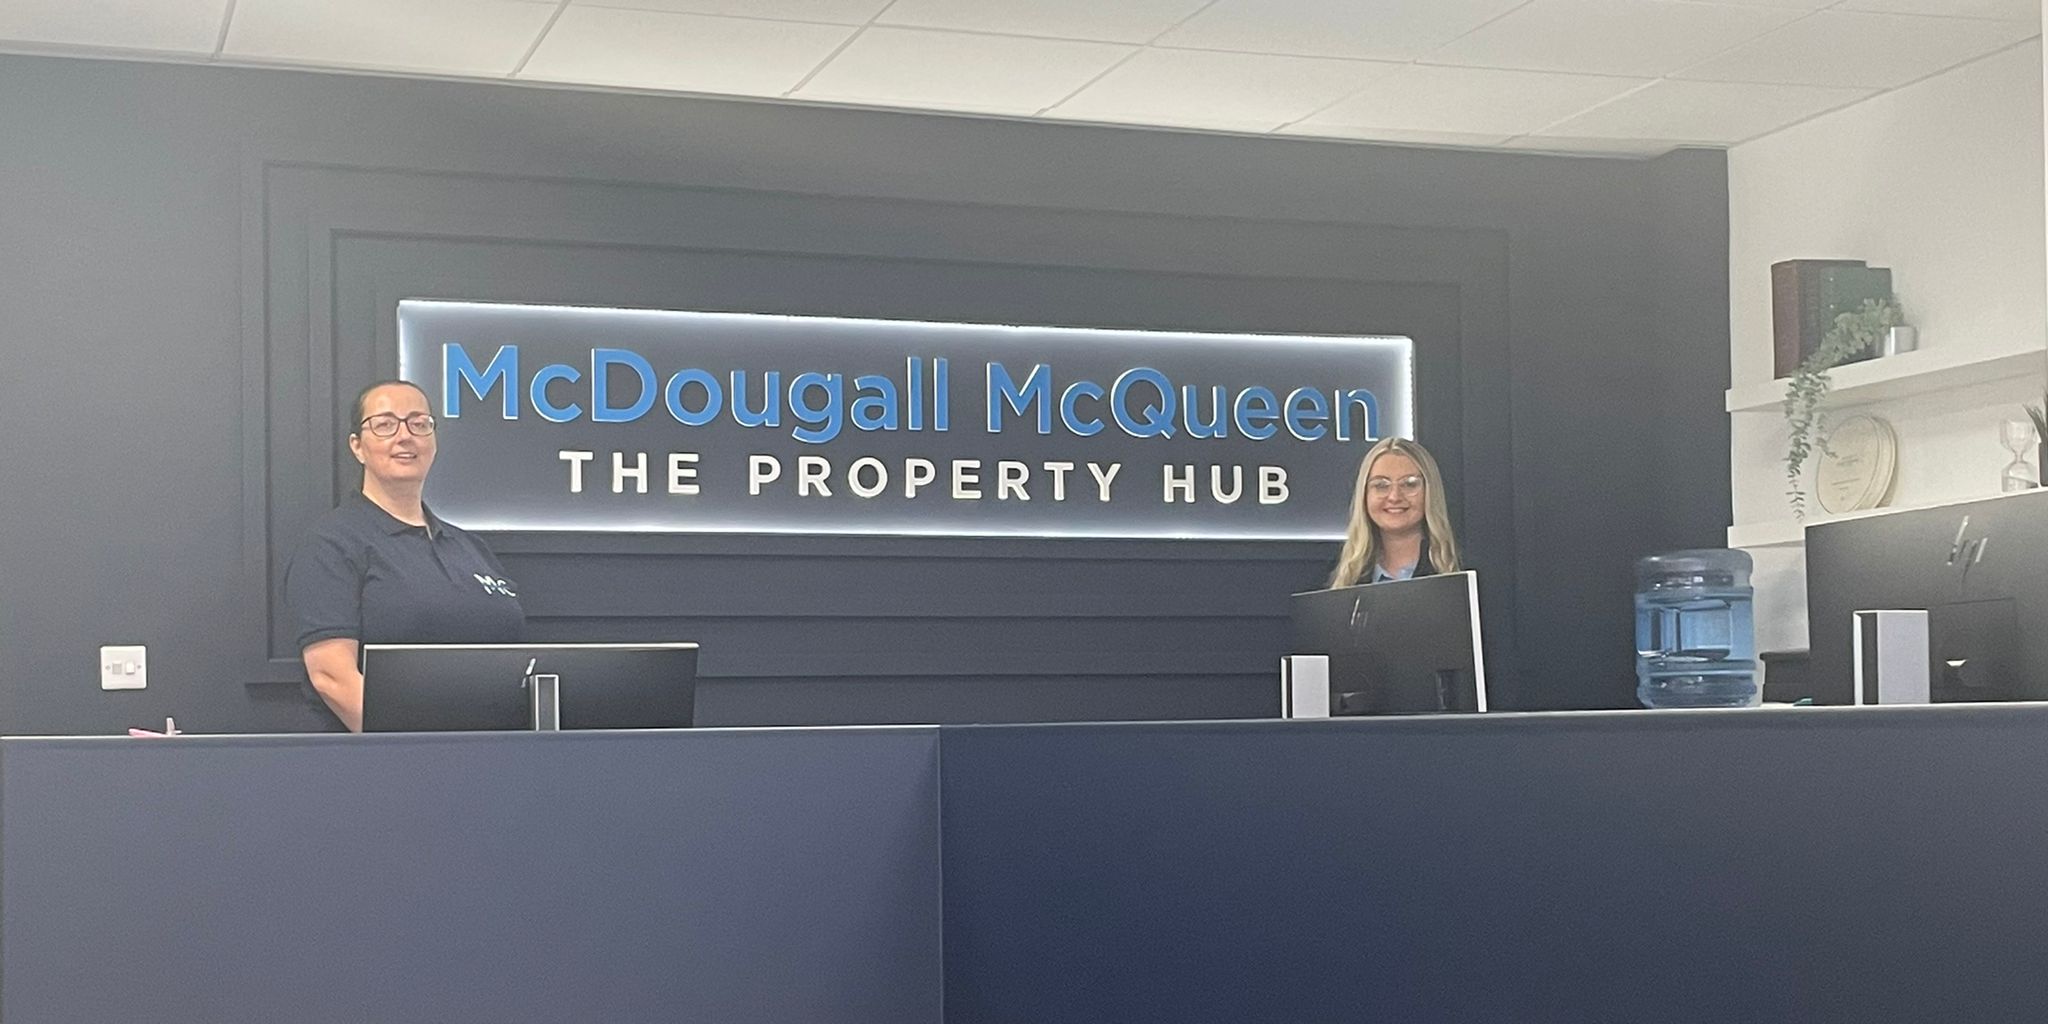 McDougall McQueen launches property hub in Dalkeith